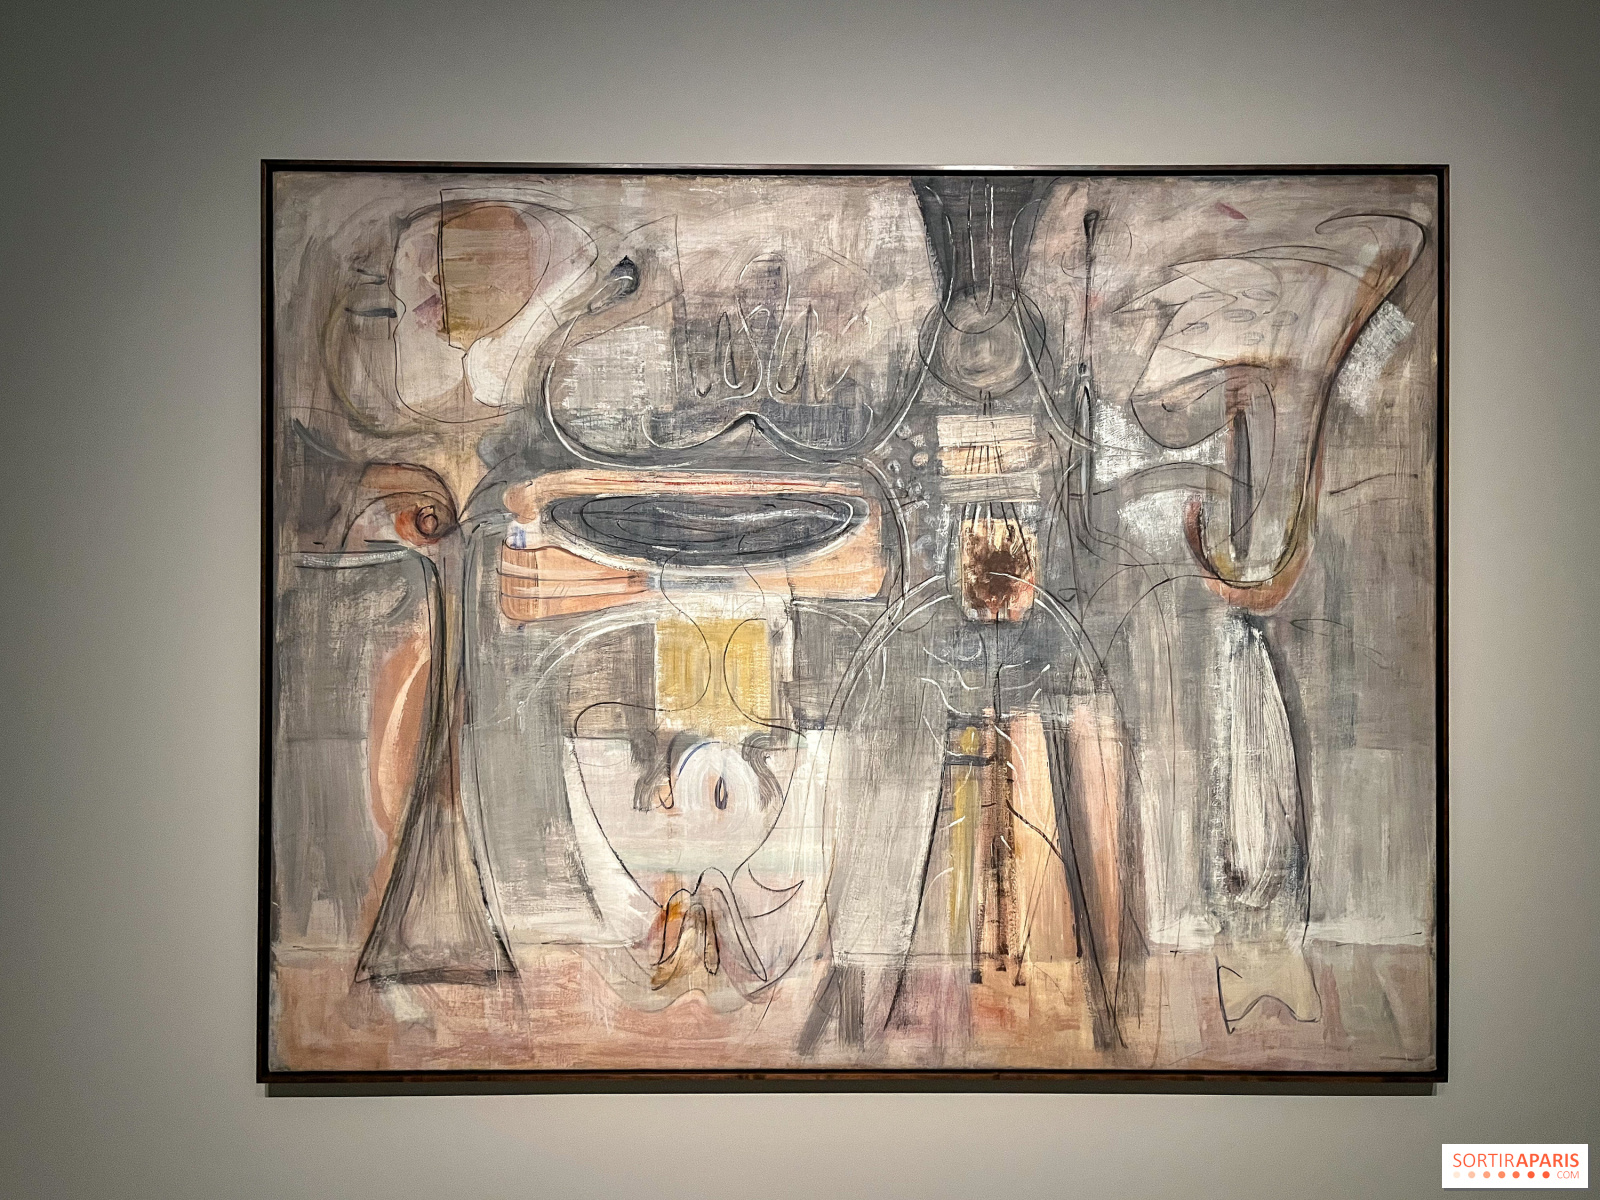 Mark Rothko exhibition at the Fondation Louis Vuitton: discover